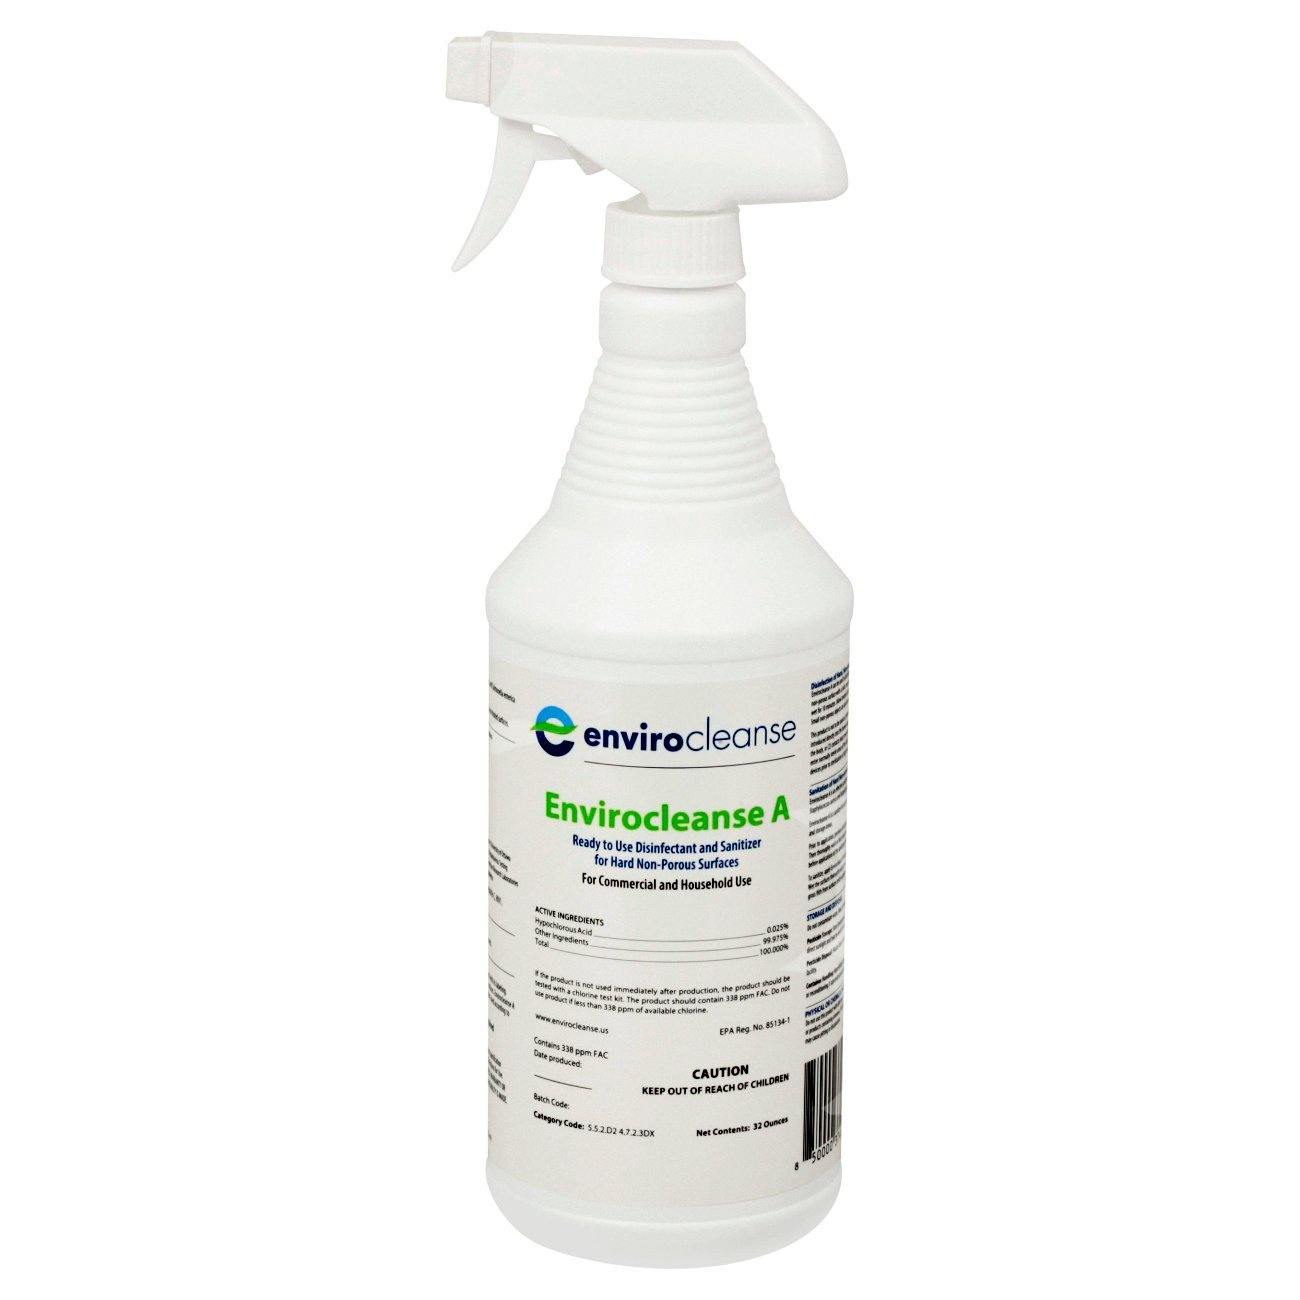 No Nonsense Disinfectant Concentrated Not anti bacterial Multi-surface Hard  non-porous surfaces Any room Disinfectant & cleaner, 5L Bottle